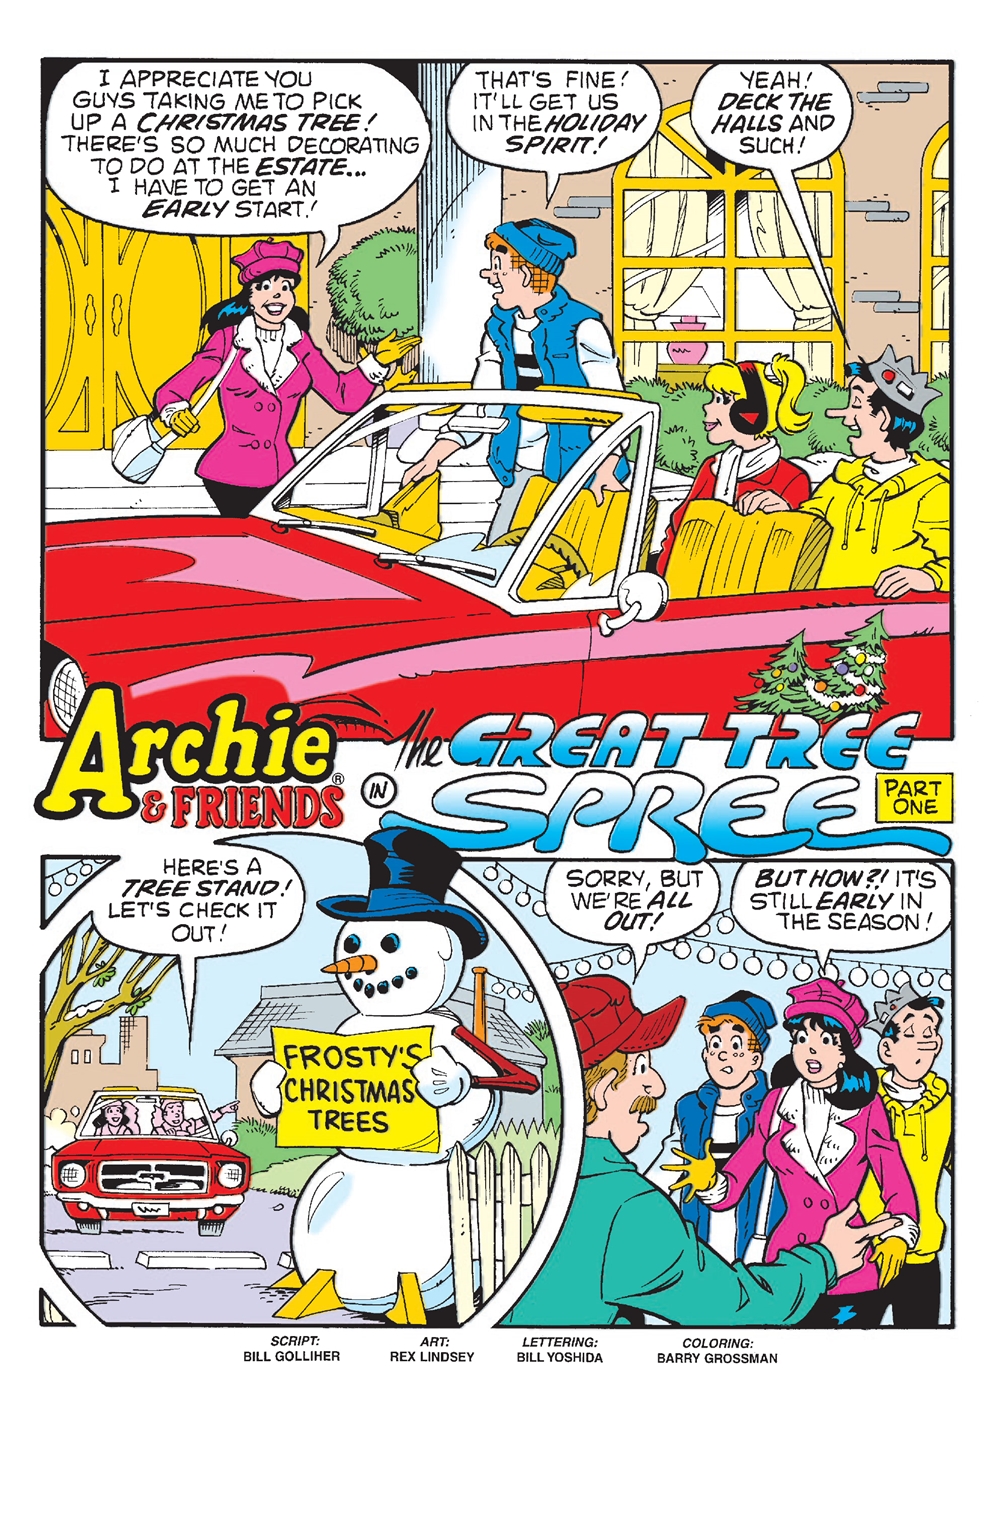 Archie%2527s%2BChristmas%2BSpectacular%2B2020%2B001-002